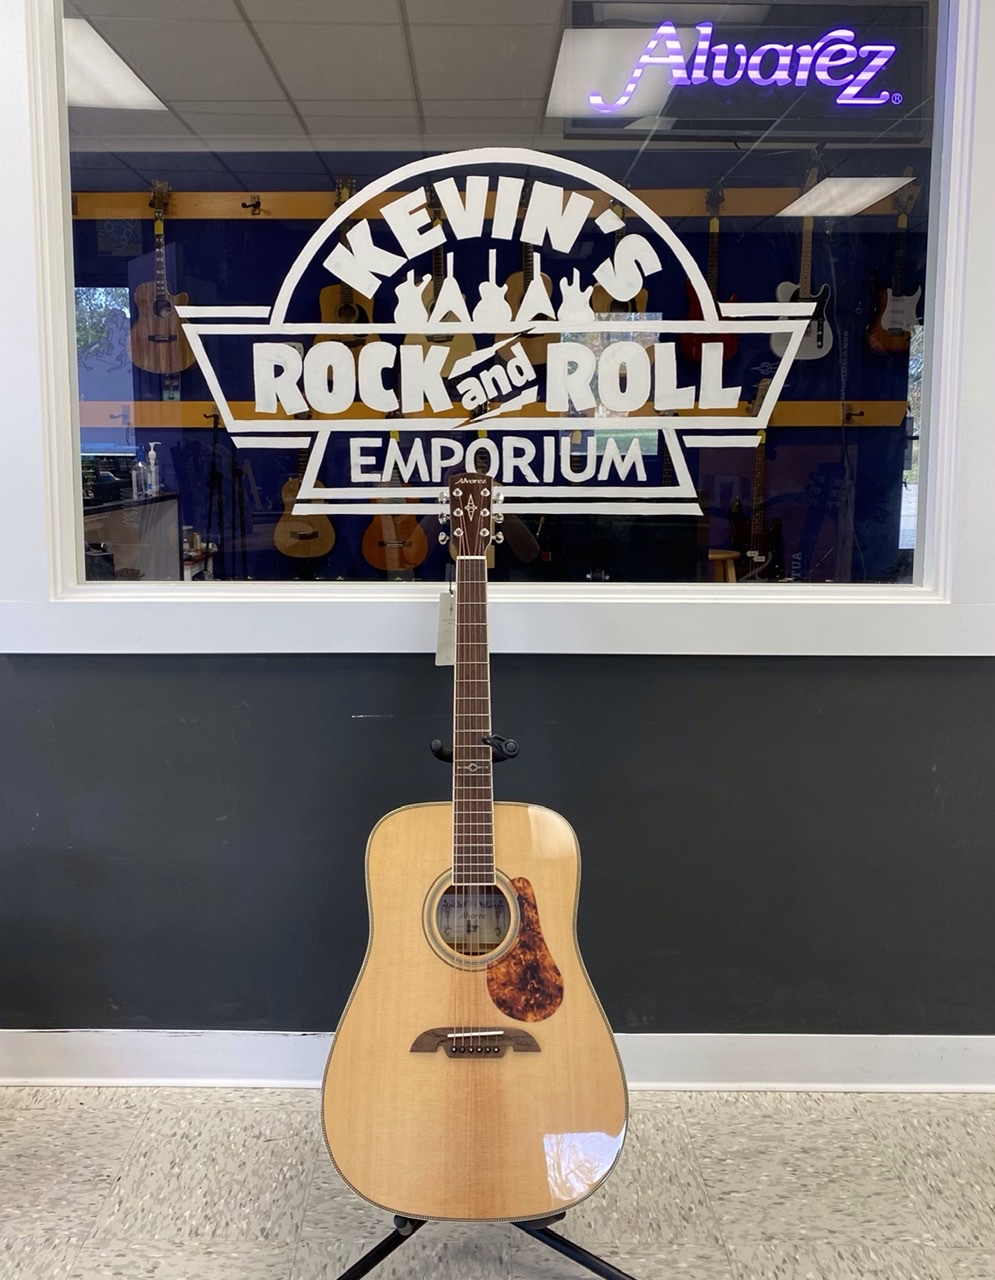 Kevins Rock And Roll Emporium | 1696 Fairview Blvd Ste 100, Fairview, TN 37062 | Phone: (615) 266-4466